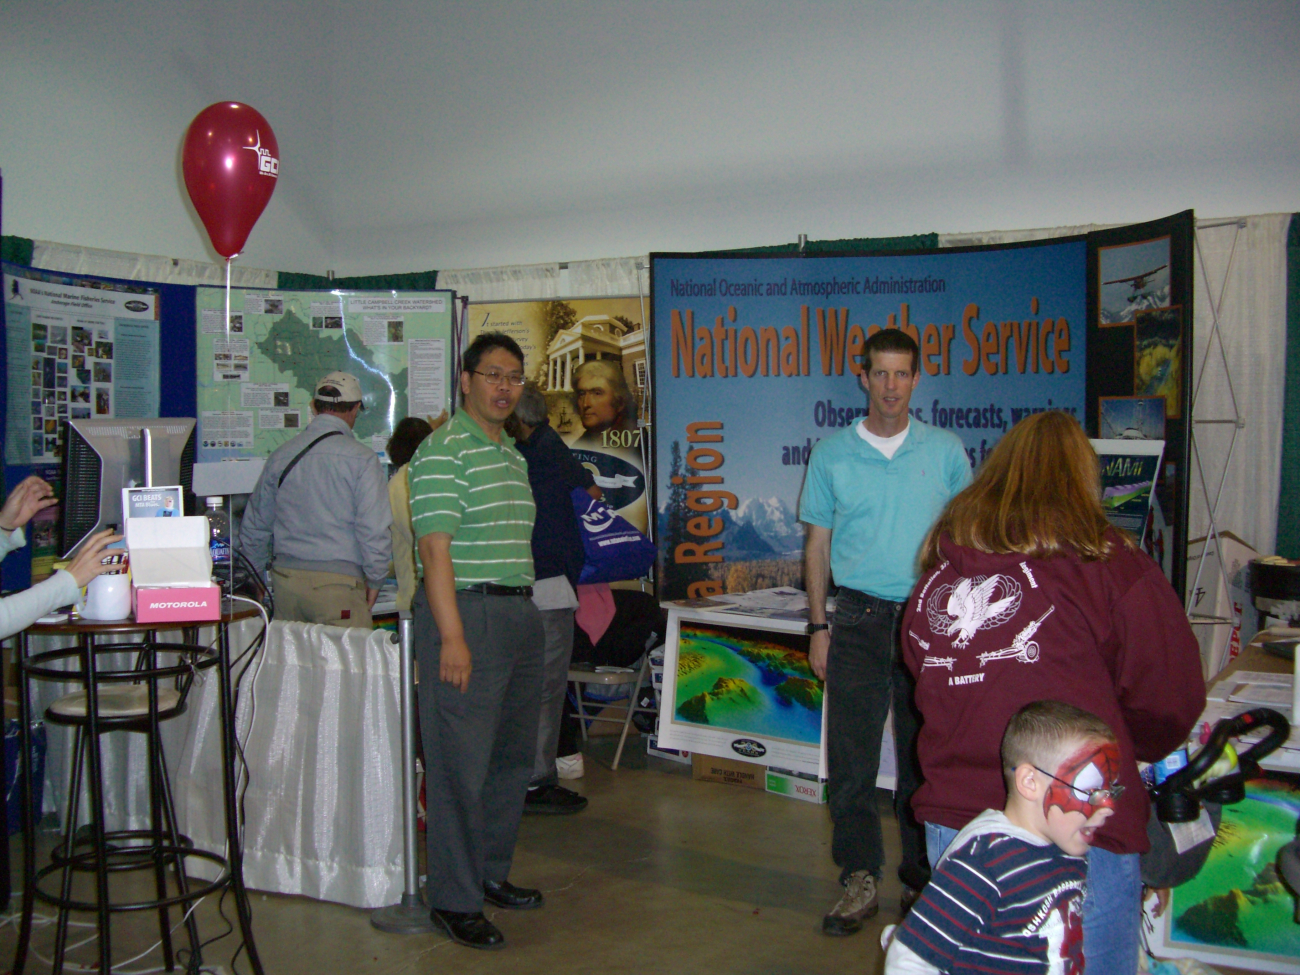 Members of NOAA's National Weather Service Alaska Region, National MarineFisheries Service Alaska Region, Office of Atmospheric Research BarrowObservatory man a booth at the Alaska State Fair at Palmer